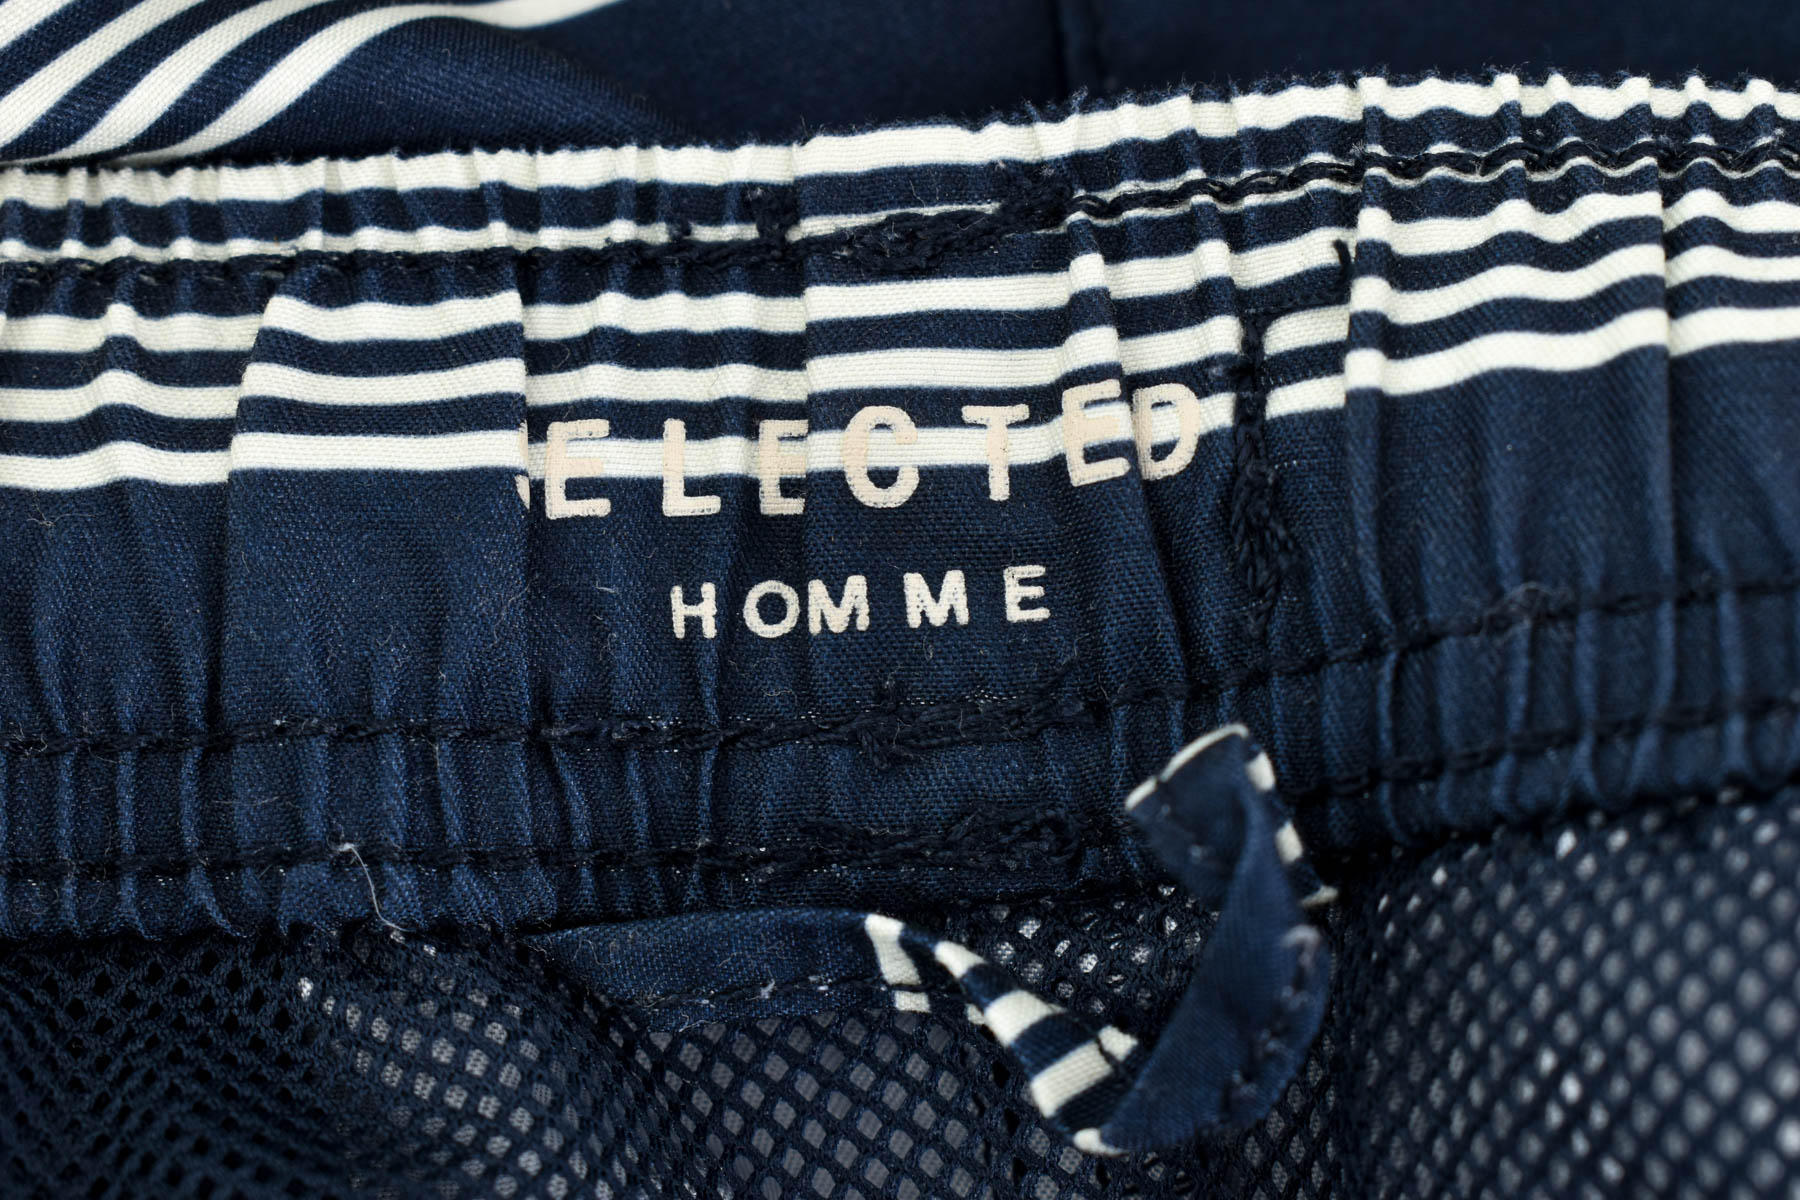 Men's shorts - SELECTED / HOMME - 2